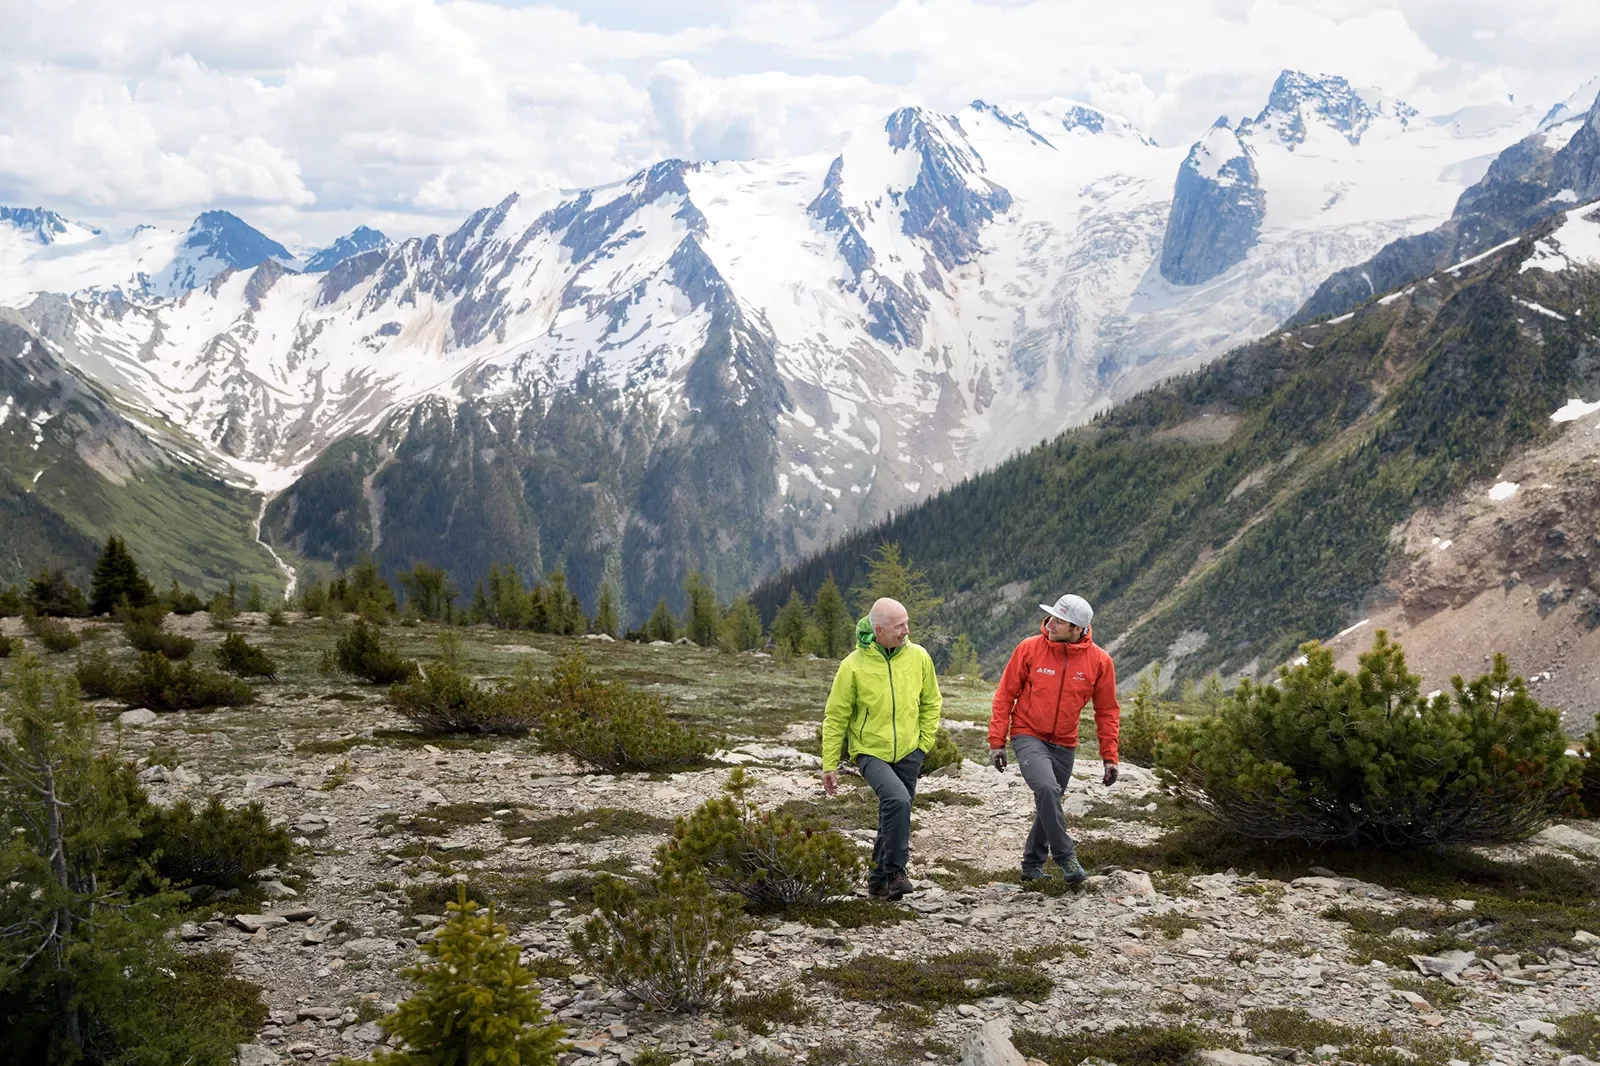 Two guests walking on hillside, Bugaboos in background.